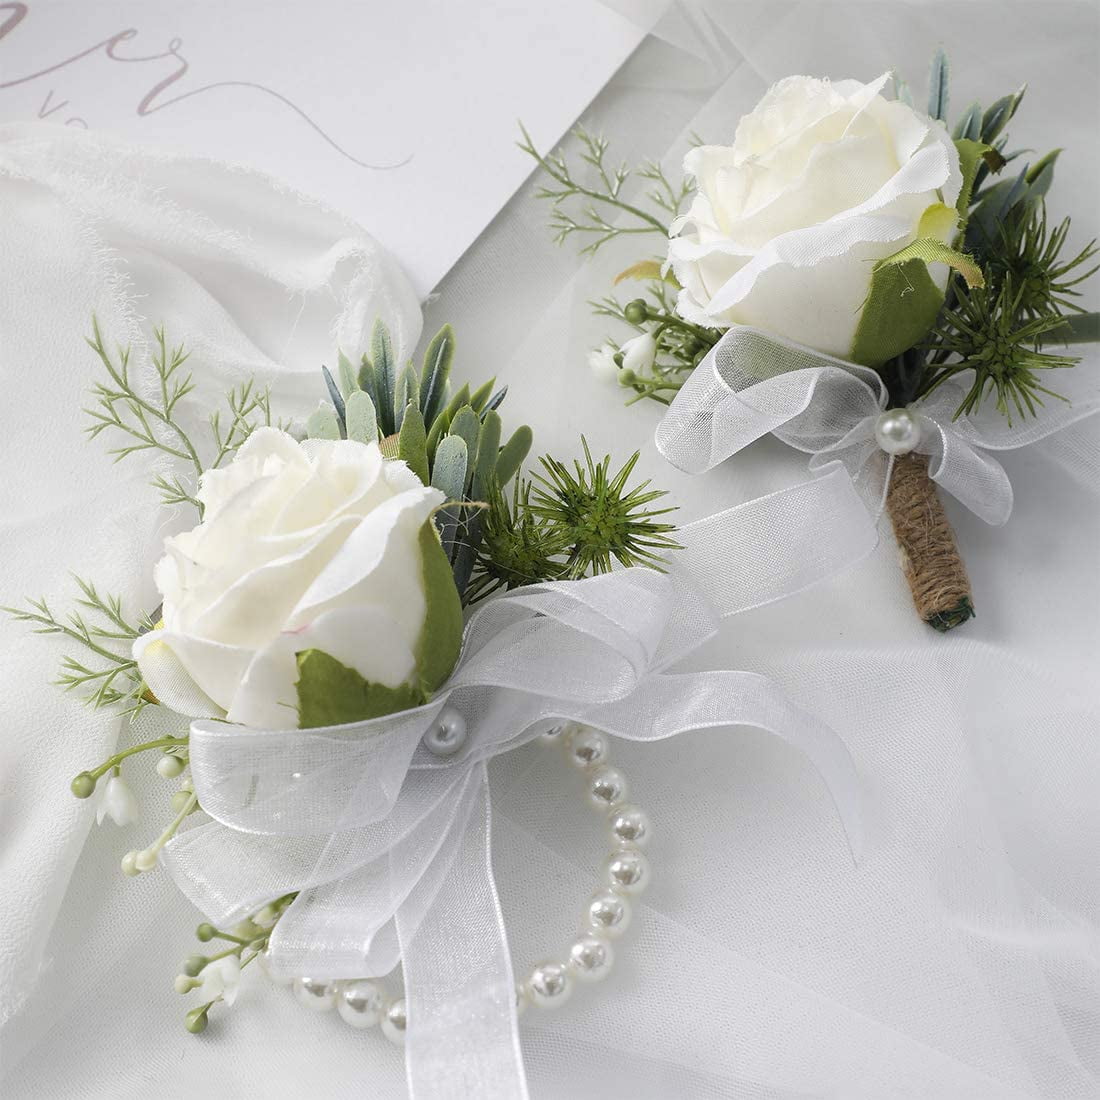 White rose button holes with fern leaf weddings prom special occasions 